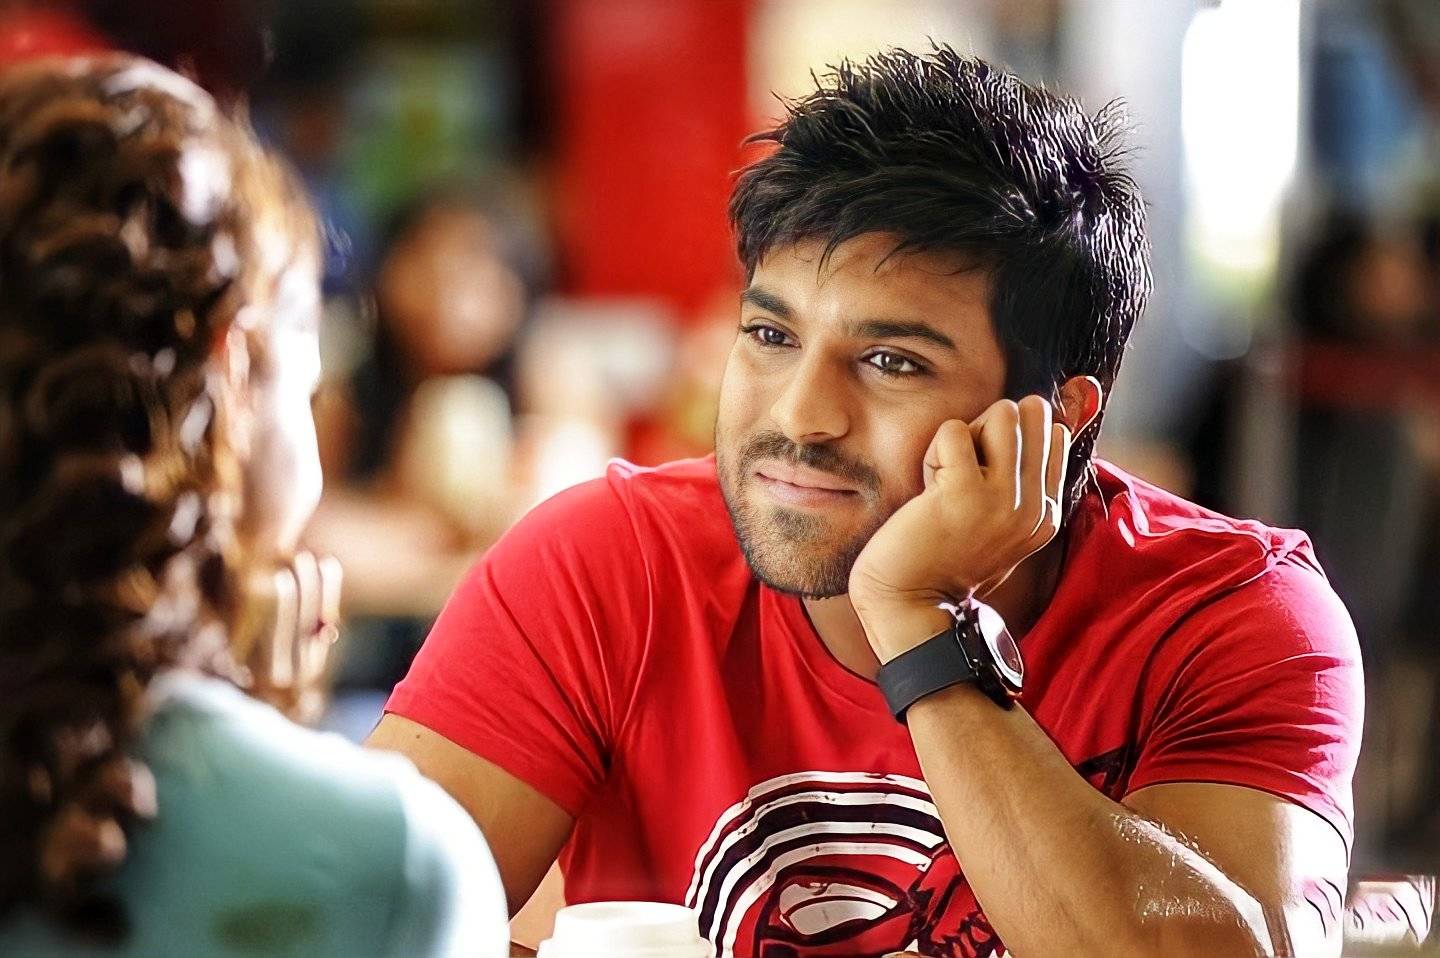 10 Years For Orange: Check Out Some Throwback Pics From The Sets Of Ram  Charan And Genelia Starrer | Telugu Movie News - Times of India